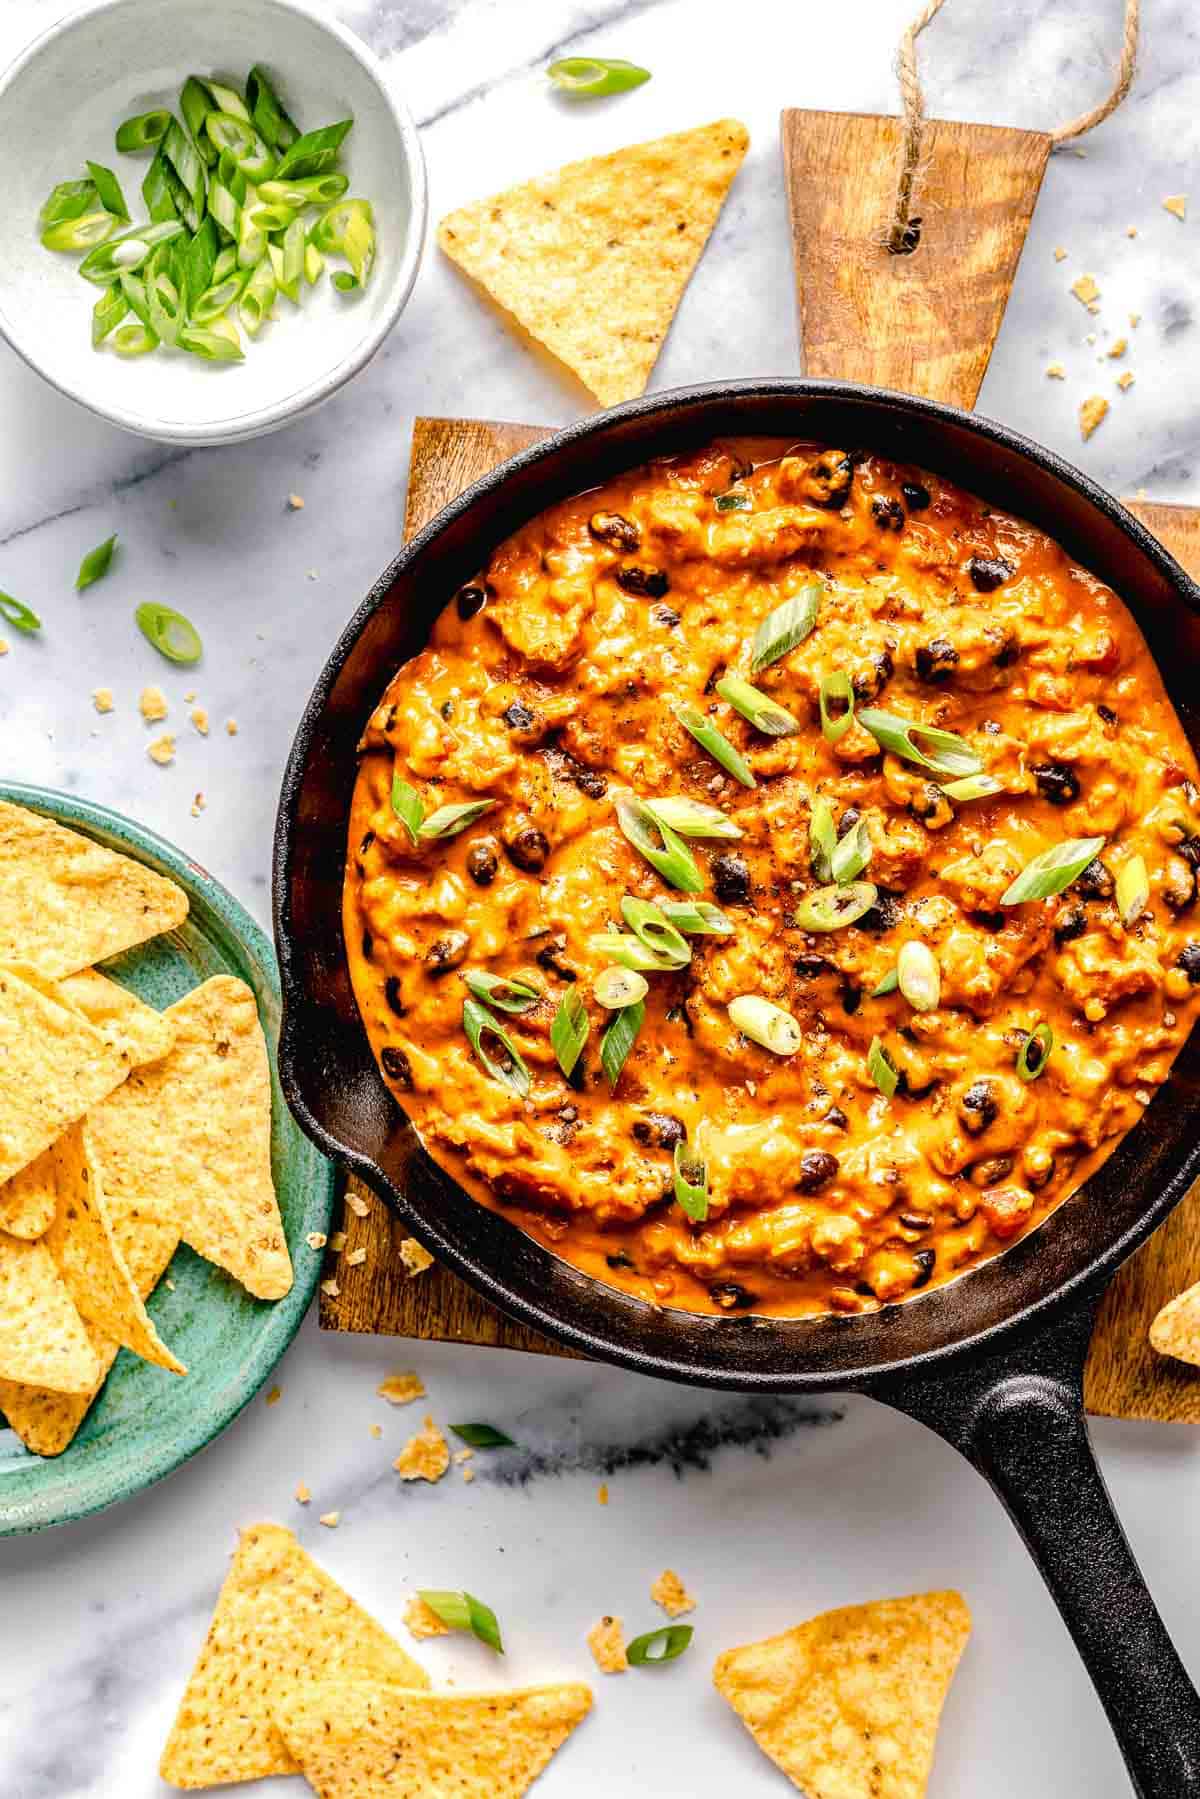 Overhead image of chili cheese dip in a skillet surrounded by tortilla chips.